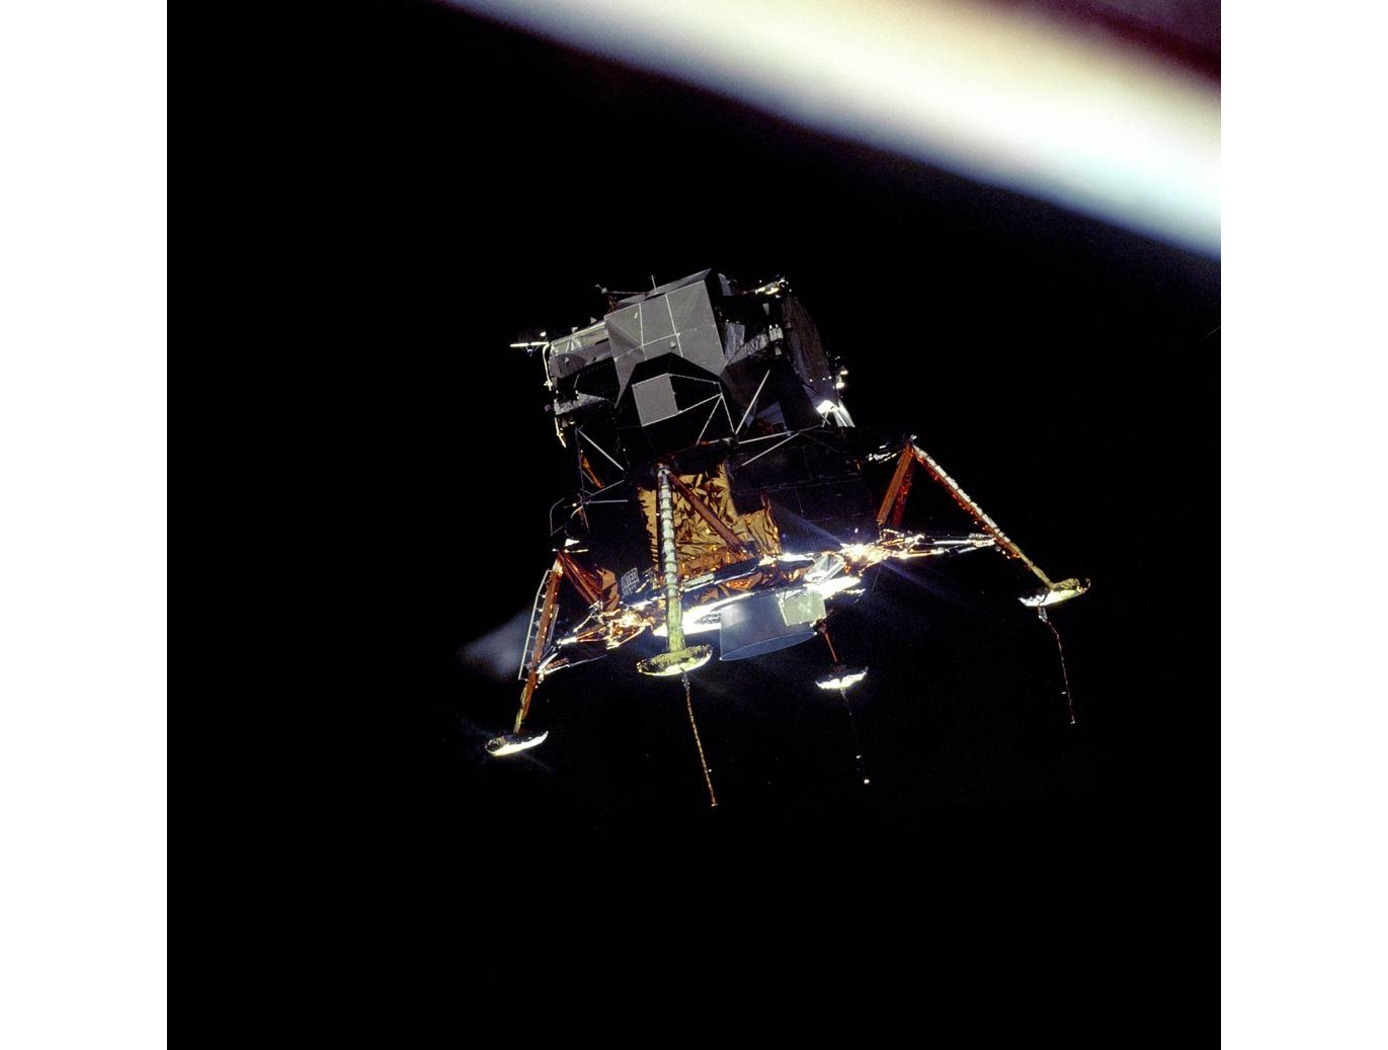 The Apollo 11 Lunar Module Eagle, in a landing configuration was photographed in lunar orbit from the Command and Service Module Columbia.